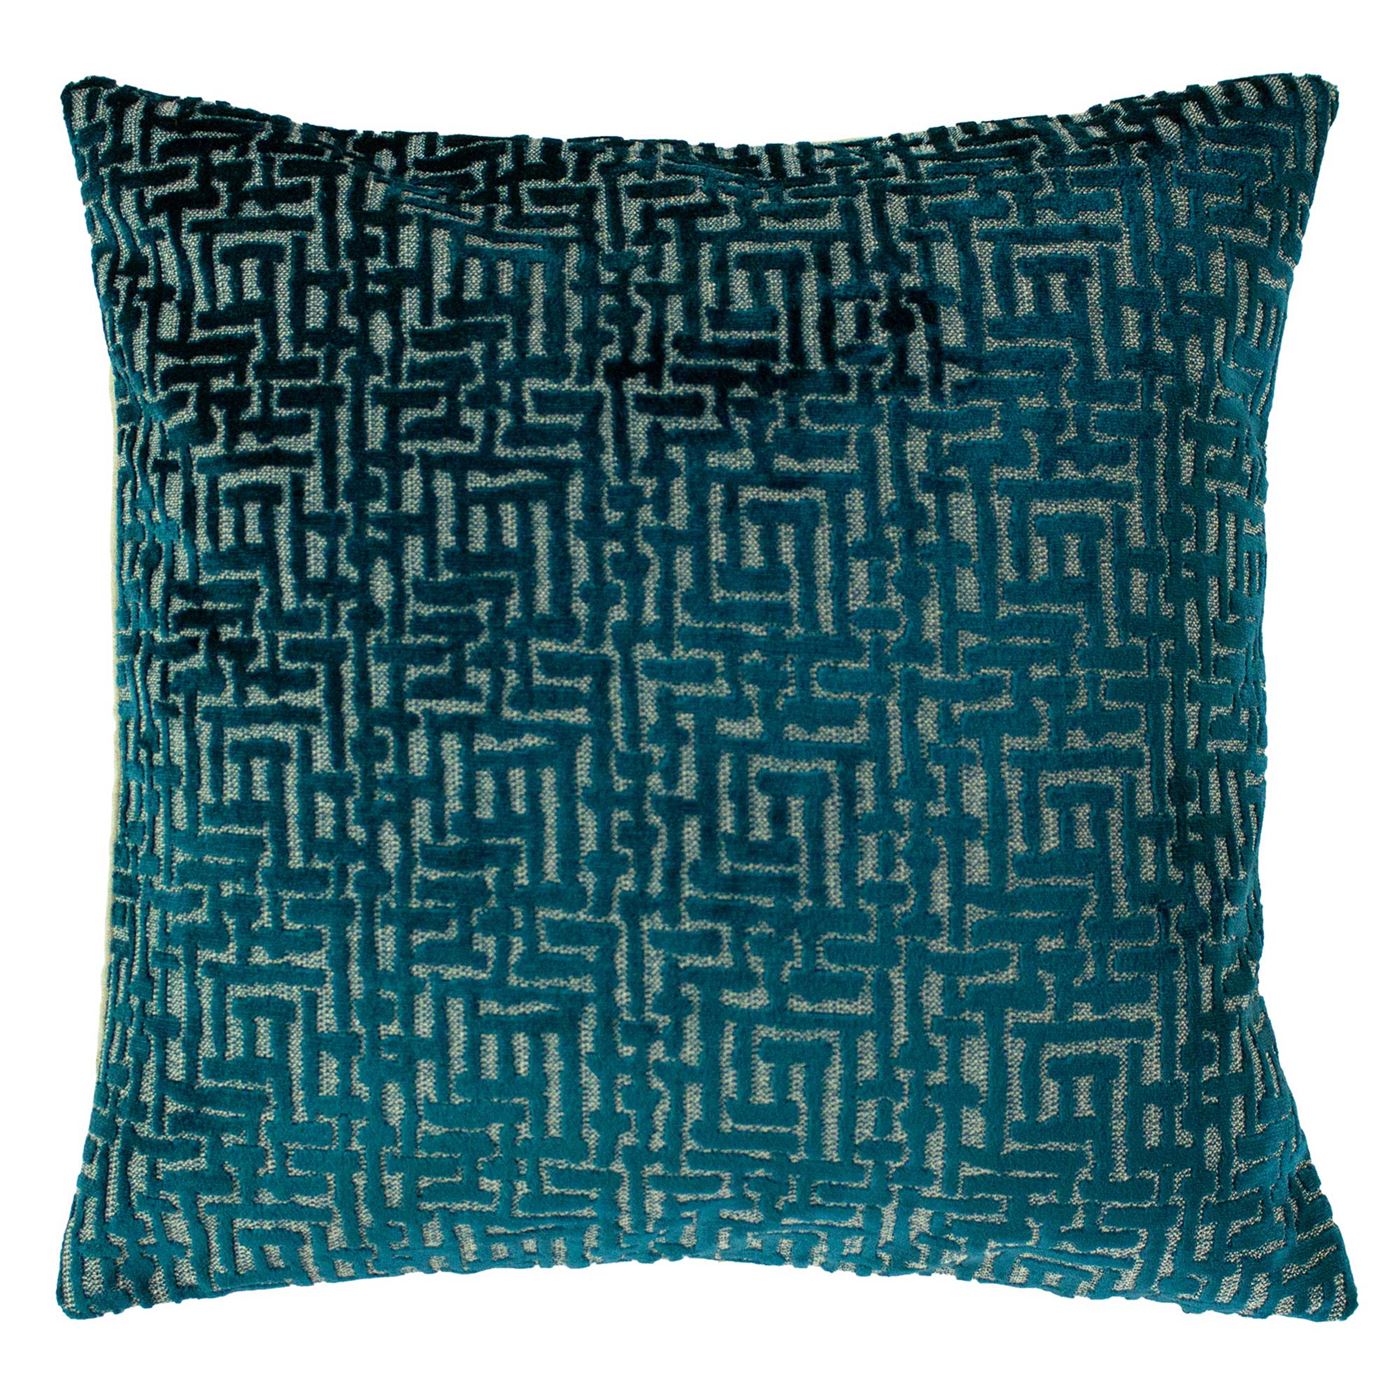 Photo of Deco teal cushion in square